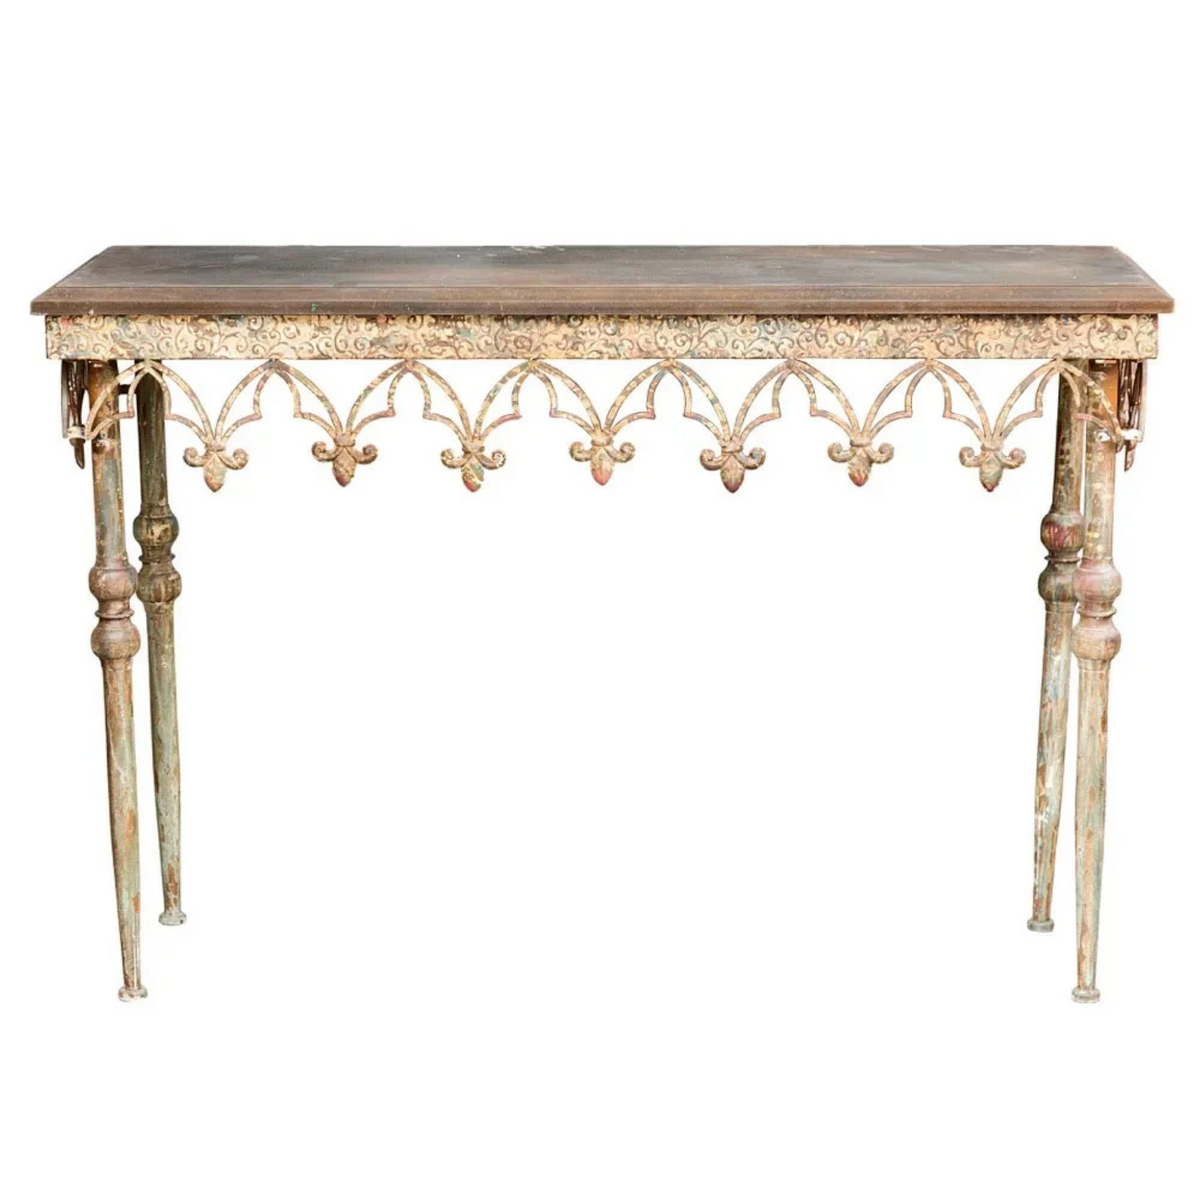 ALSACE RUSTIC FRENCH STYLE CONSOLE TABLE